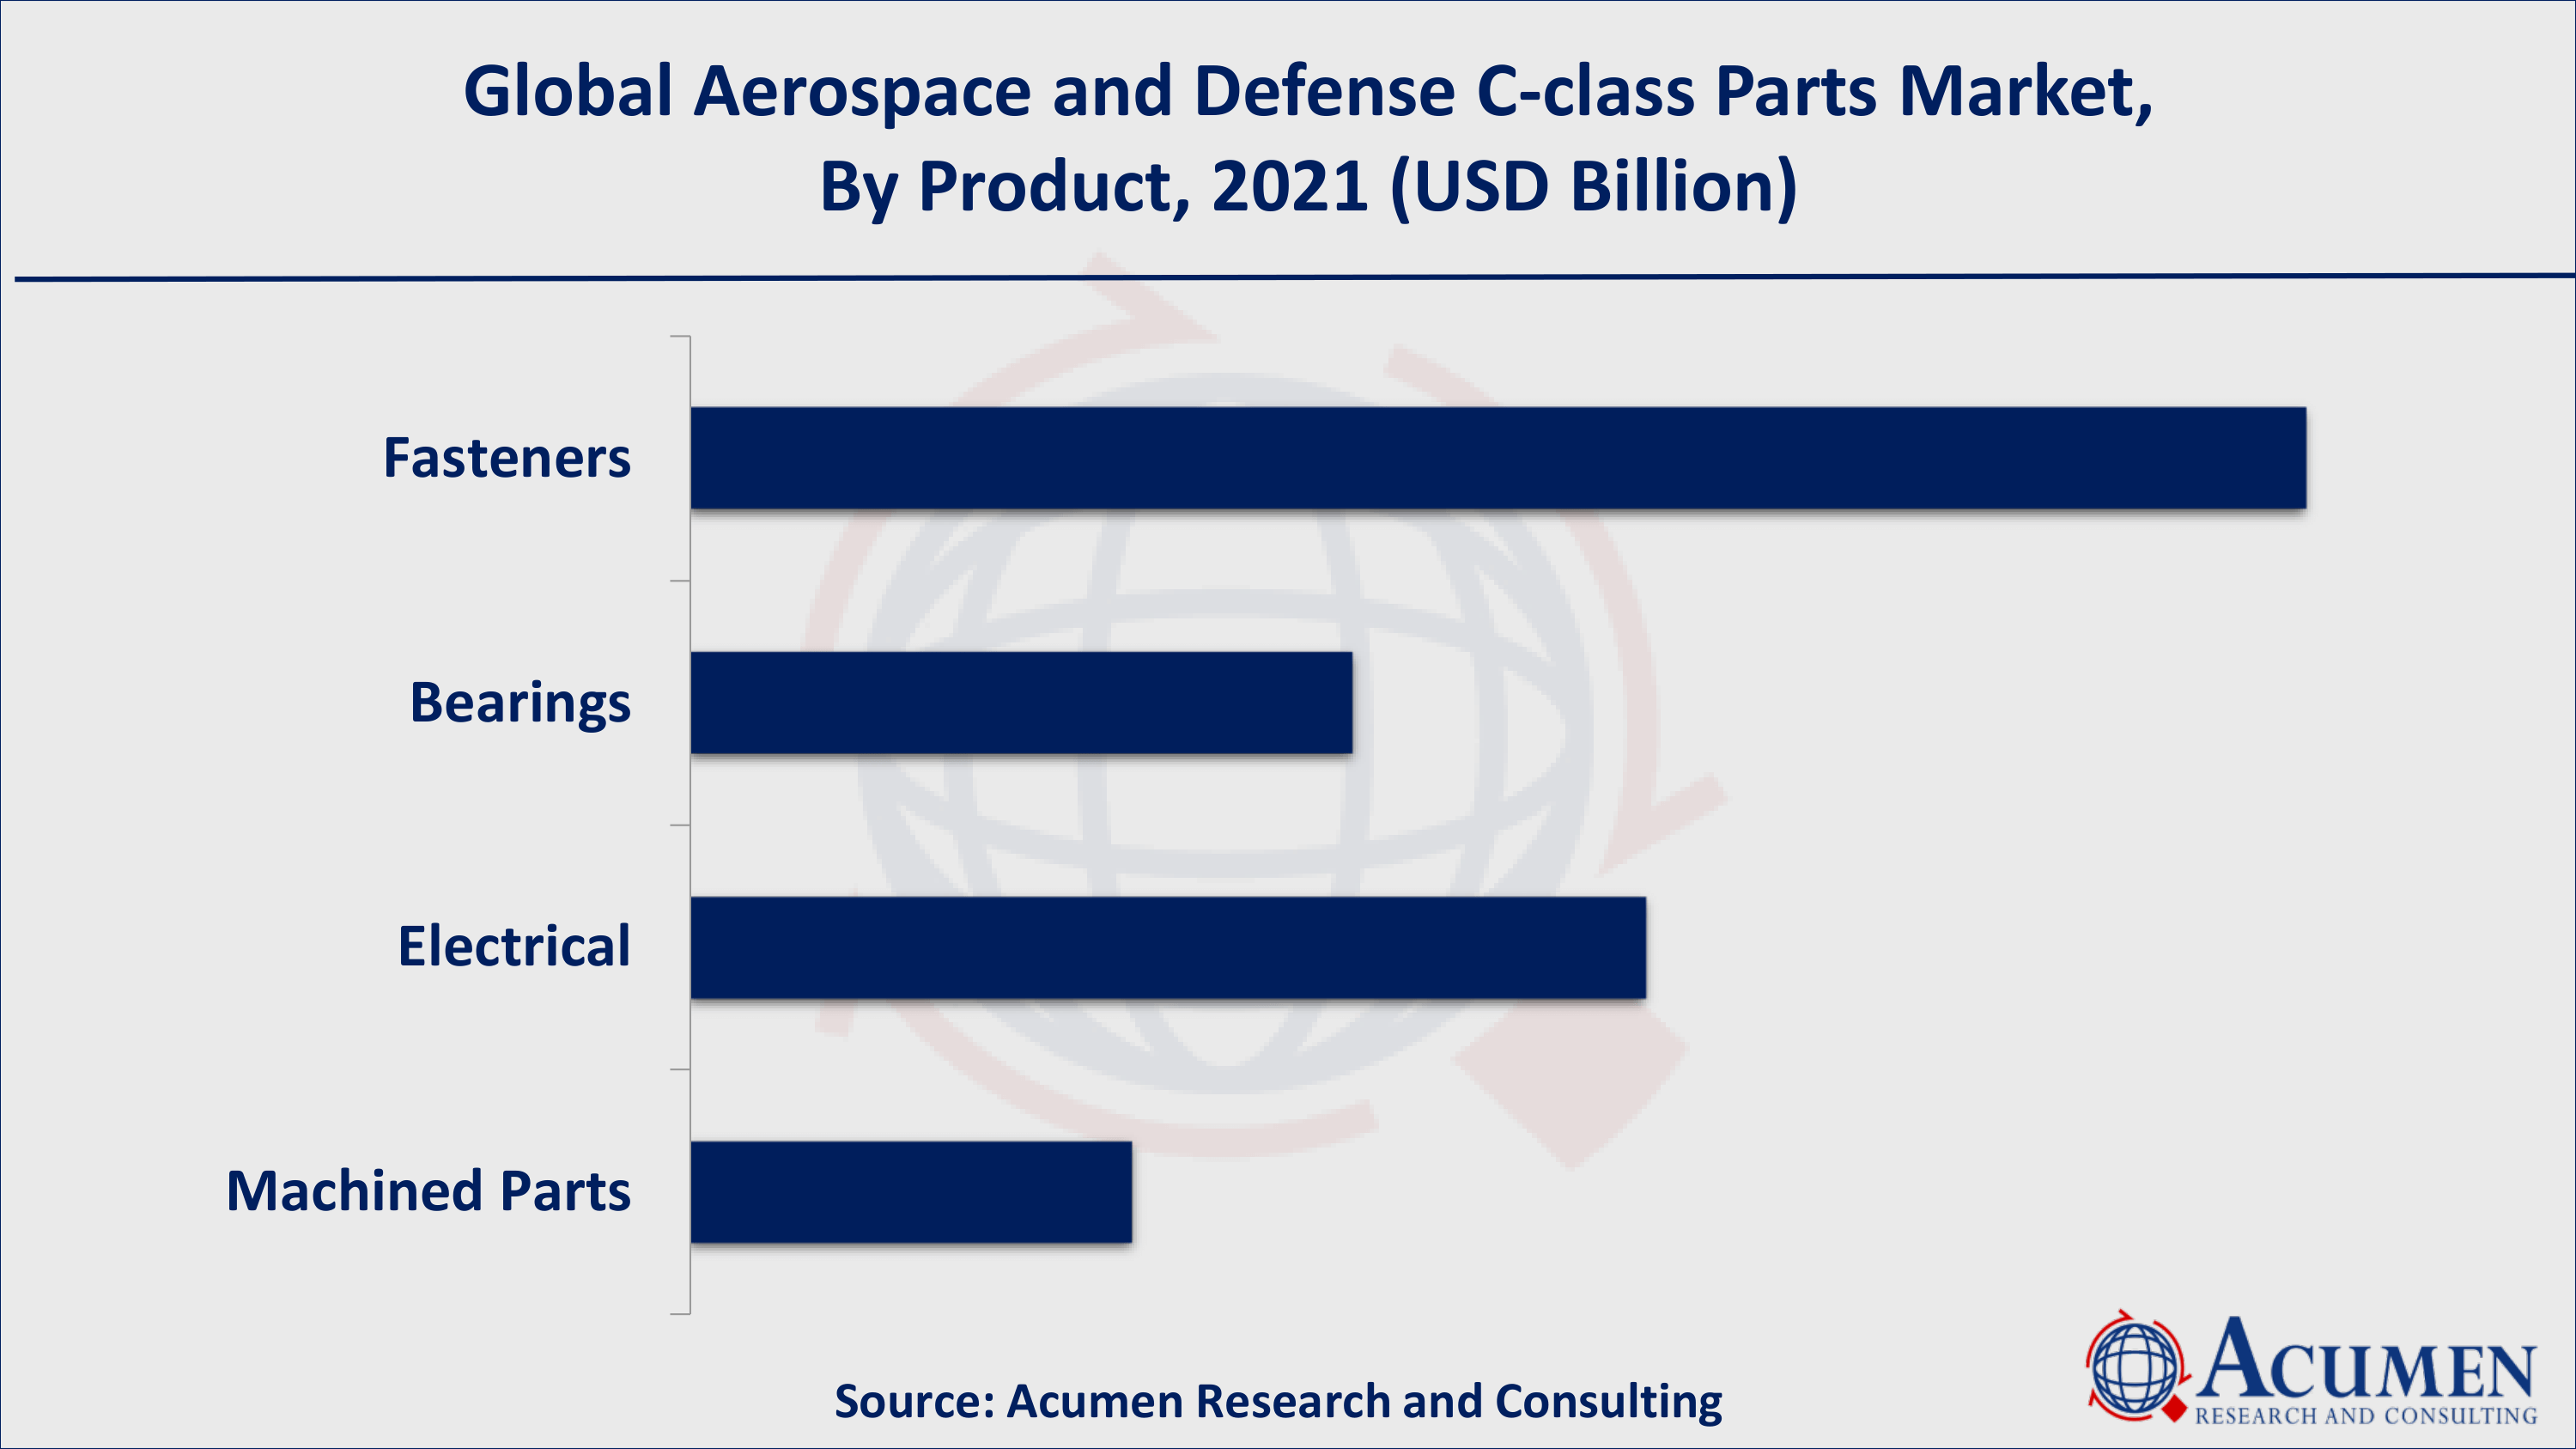 Based on product, fasteners acquired over 44% of the overall market share in 2021